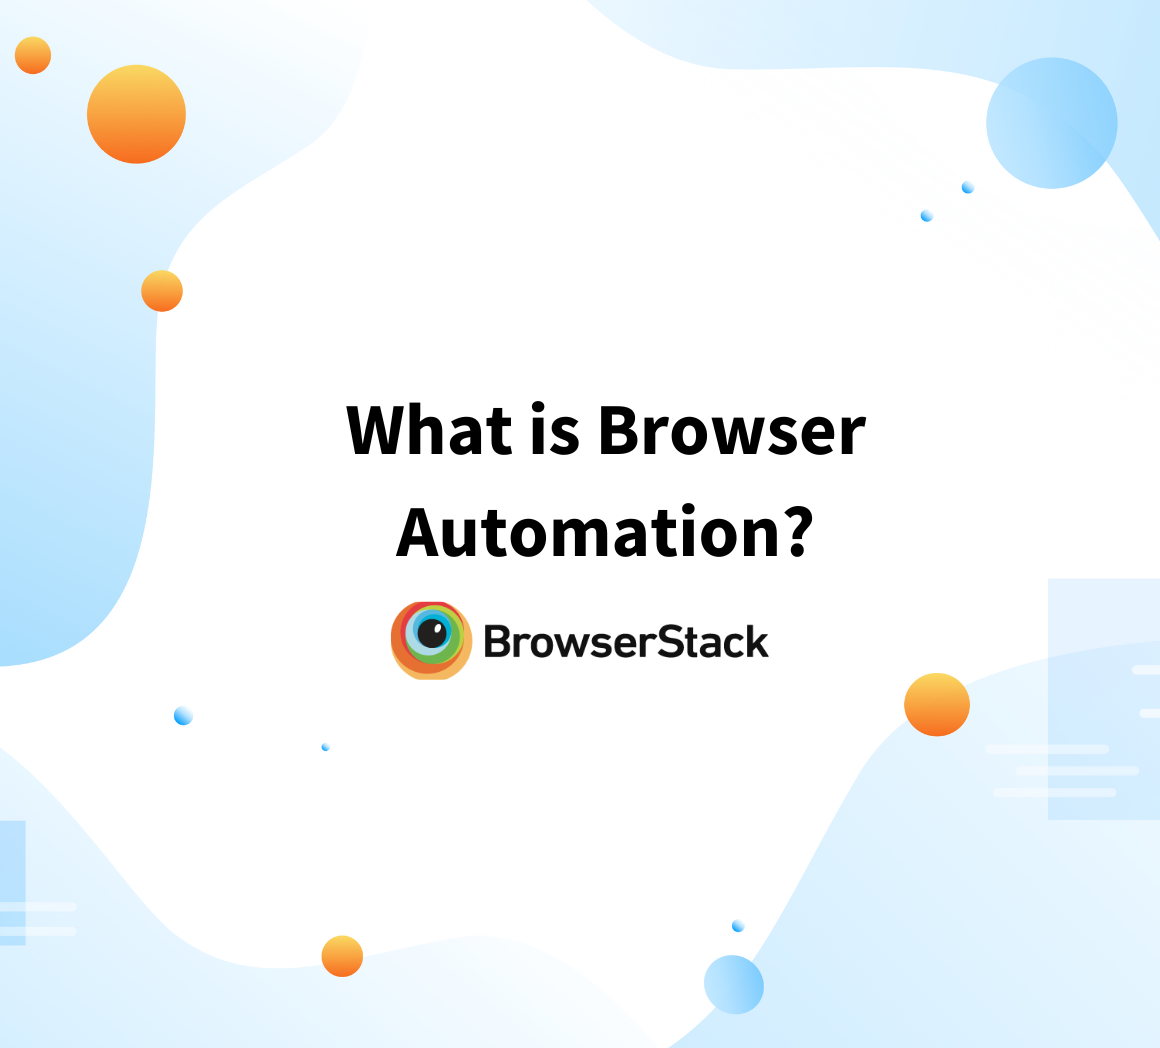 What is Browser Automation